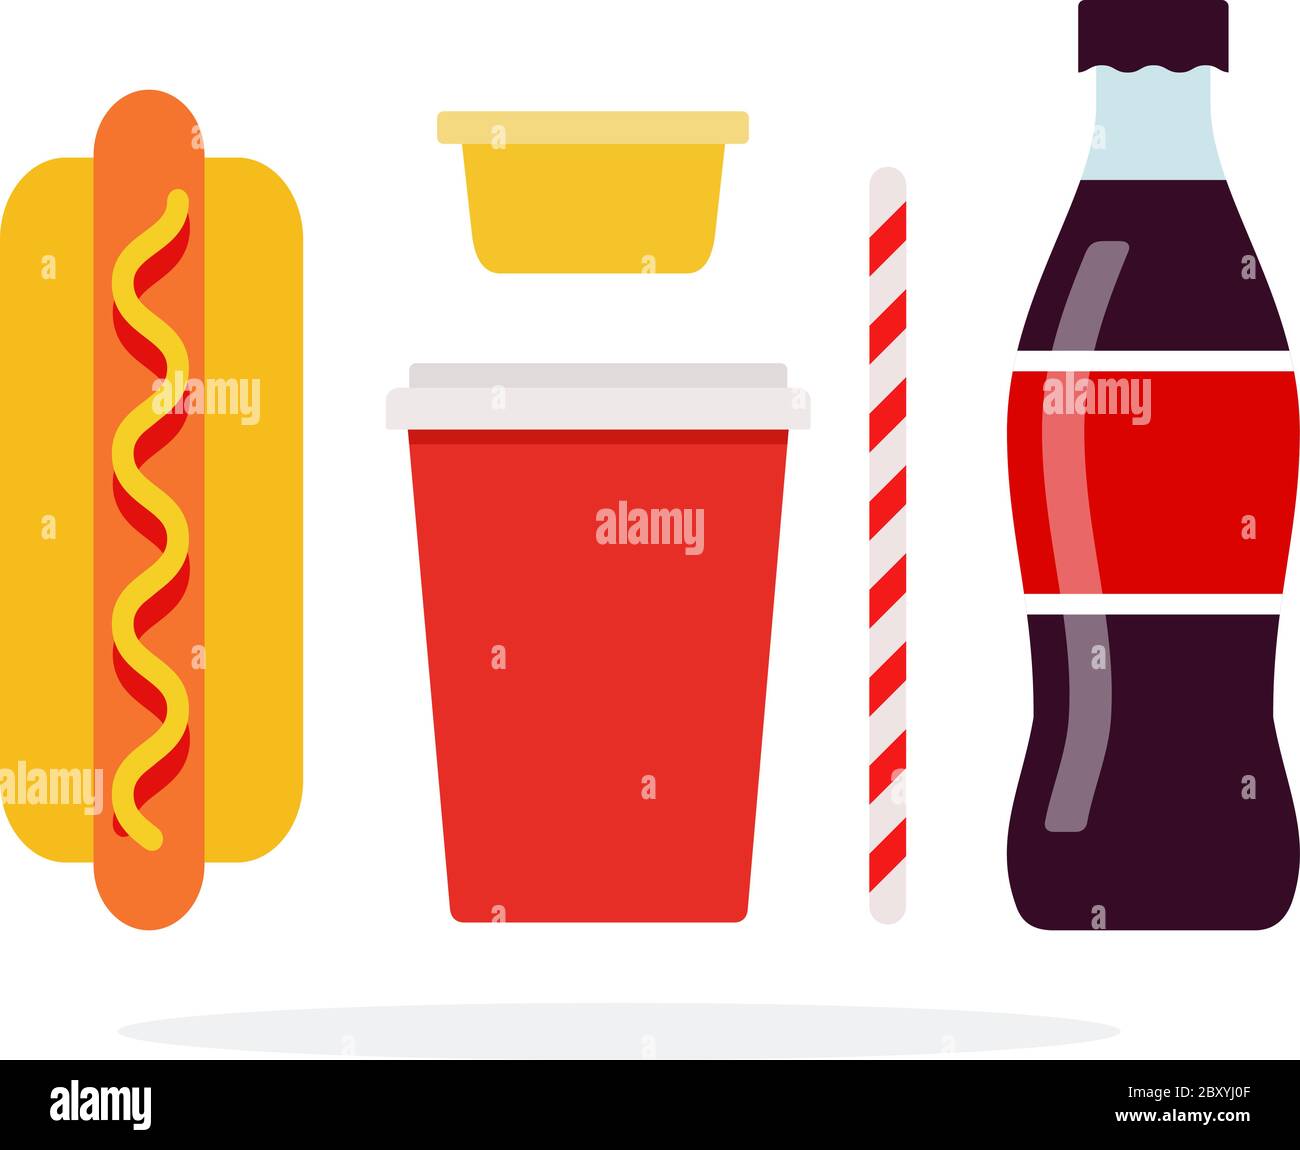 Hot dog, tall plastic cup for drinks, soda in a bottle, straws, mustard container Stock Vector